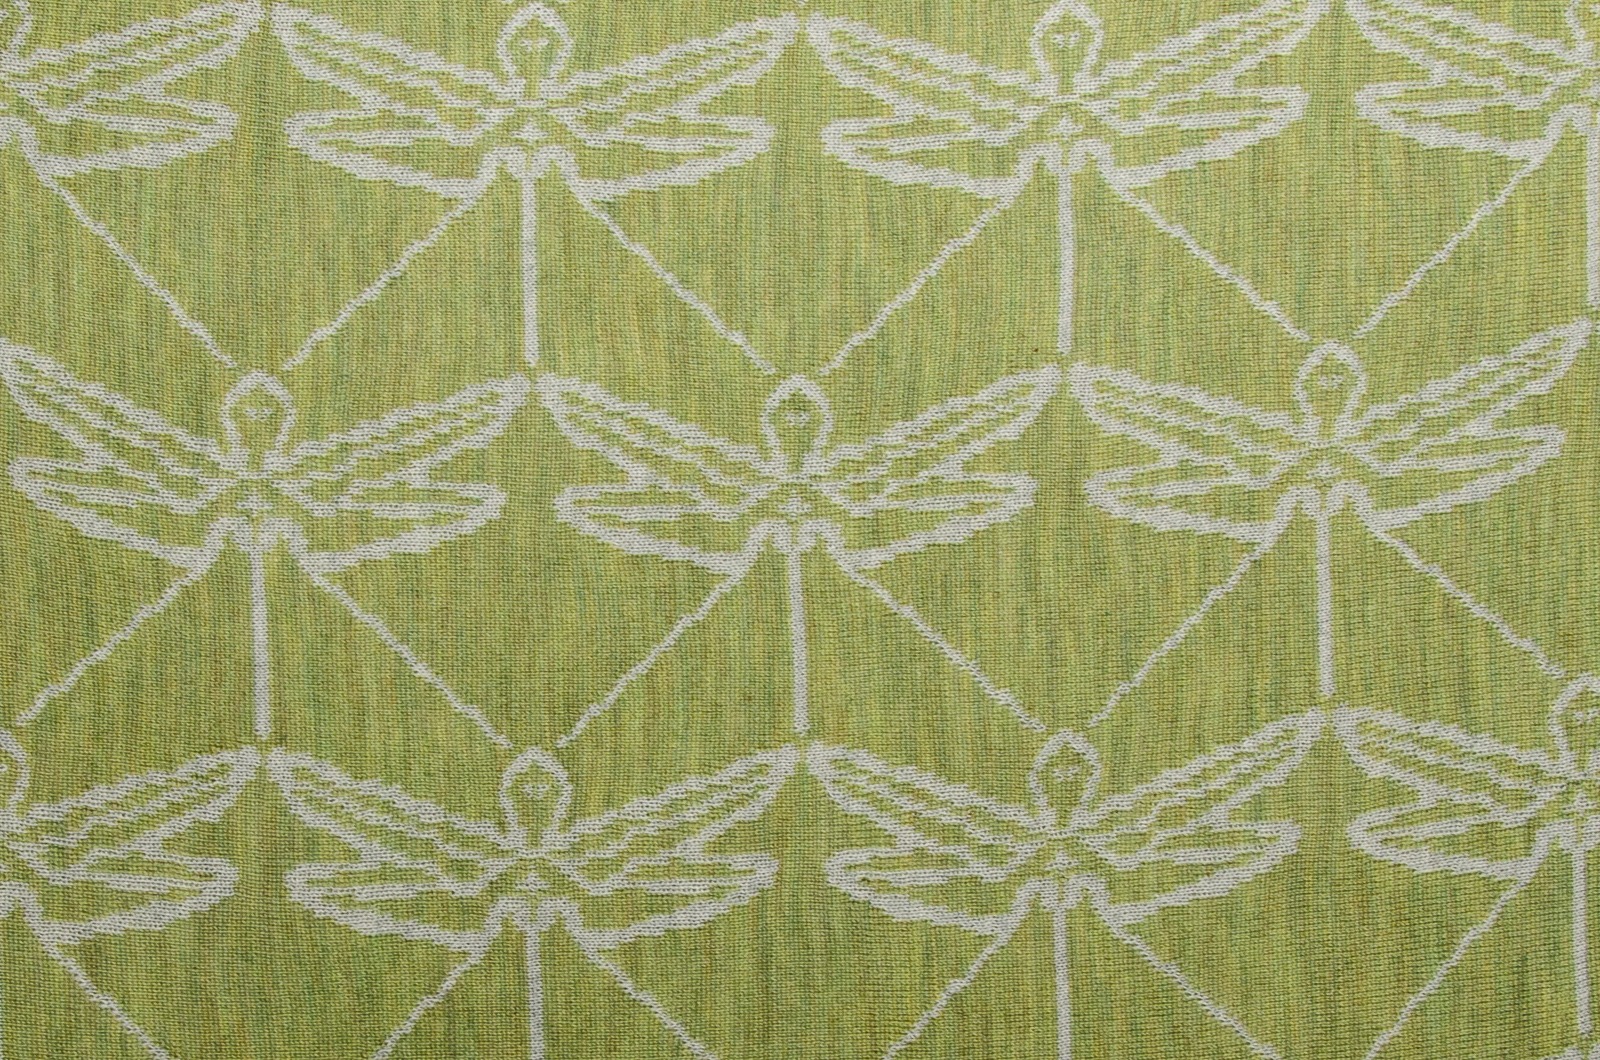 Stole, triangular shawl dragonfly in light gray and light green 3